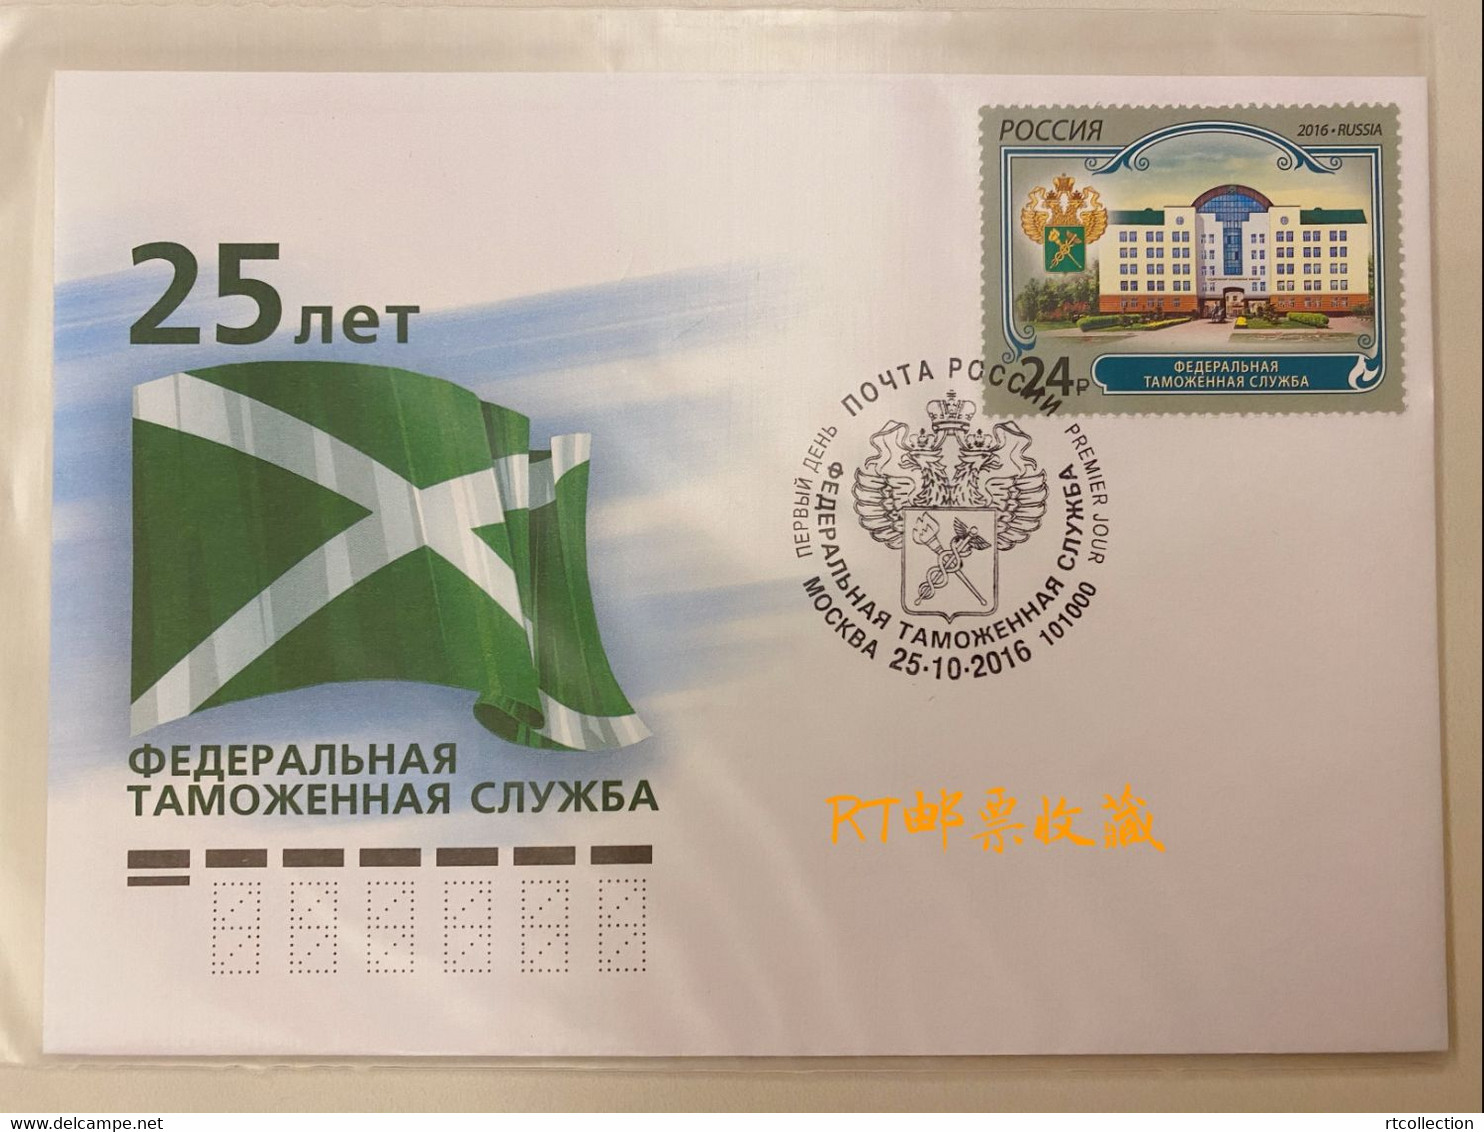 Russia 2016 FDC Federal Customs Service Office Architecture Places Coat Of Arms Customs Organizations Place Stamp - FDC